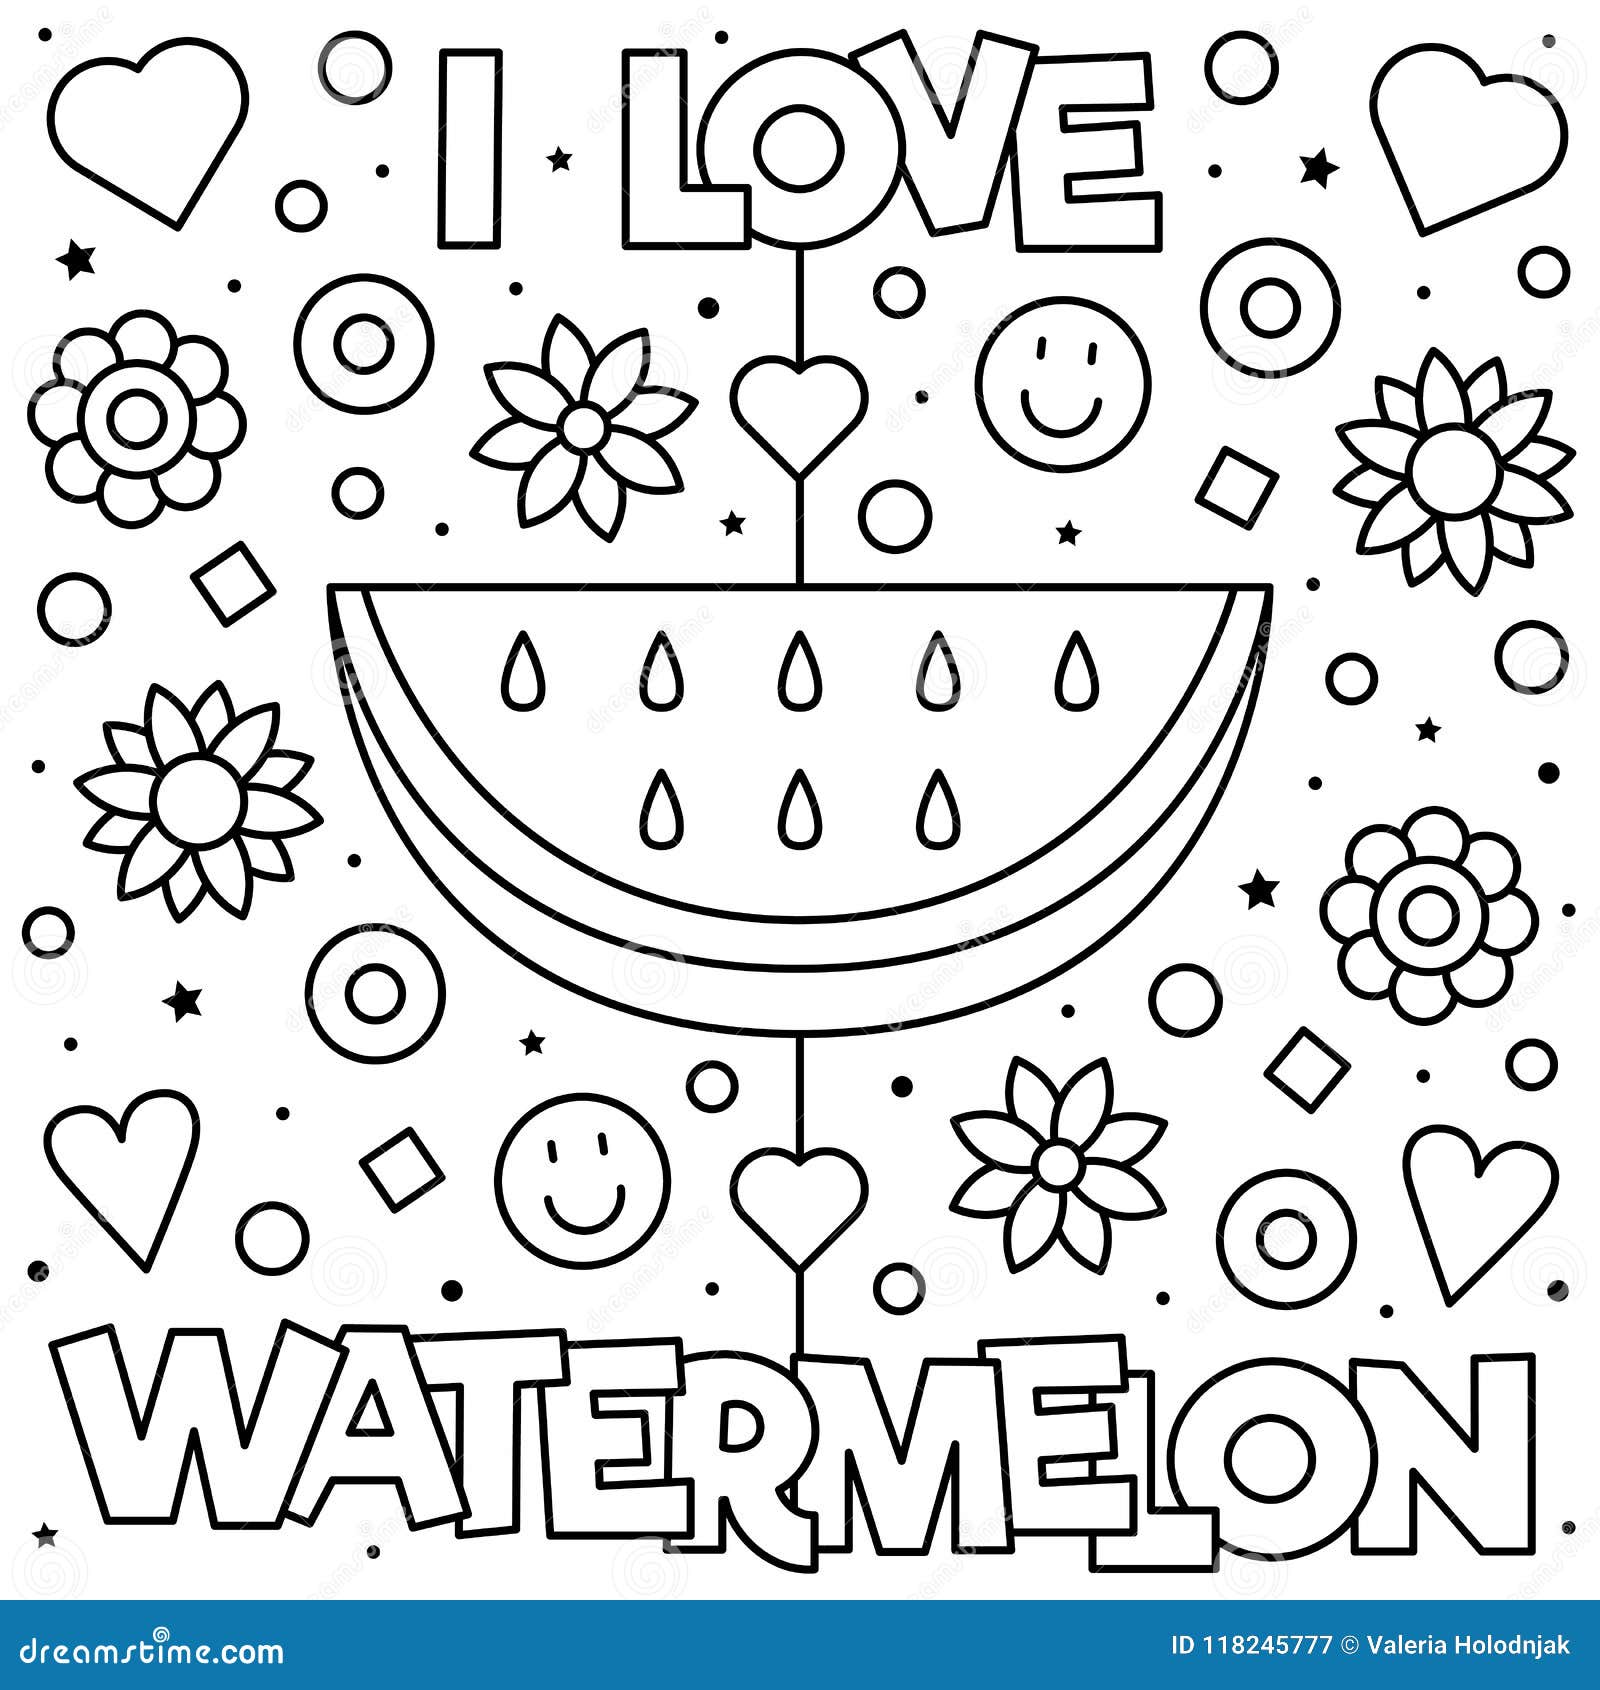 Coloring Page. Vector Illustration. Stock Vector   Illustration of ...